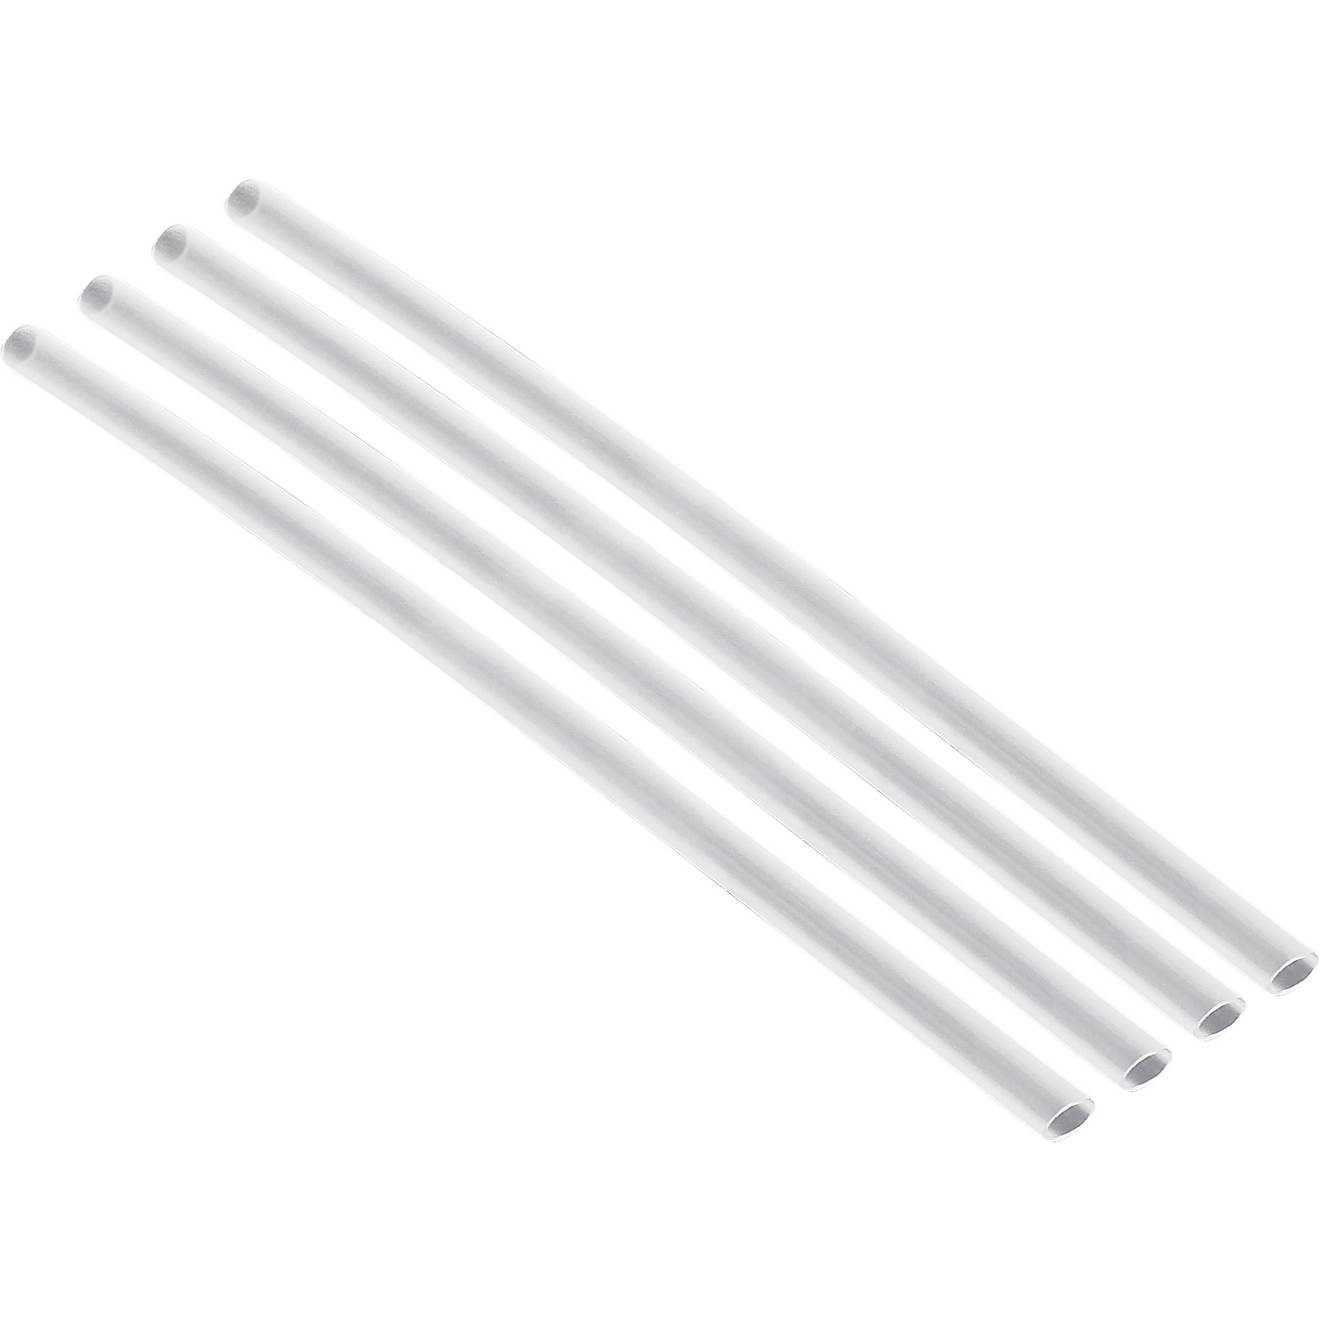 Stanley The IceFlow Replacement Straws 4-Pack